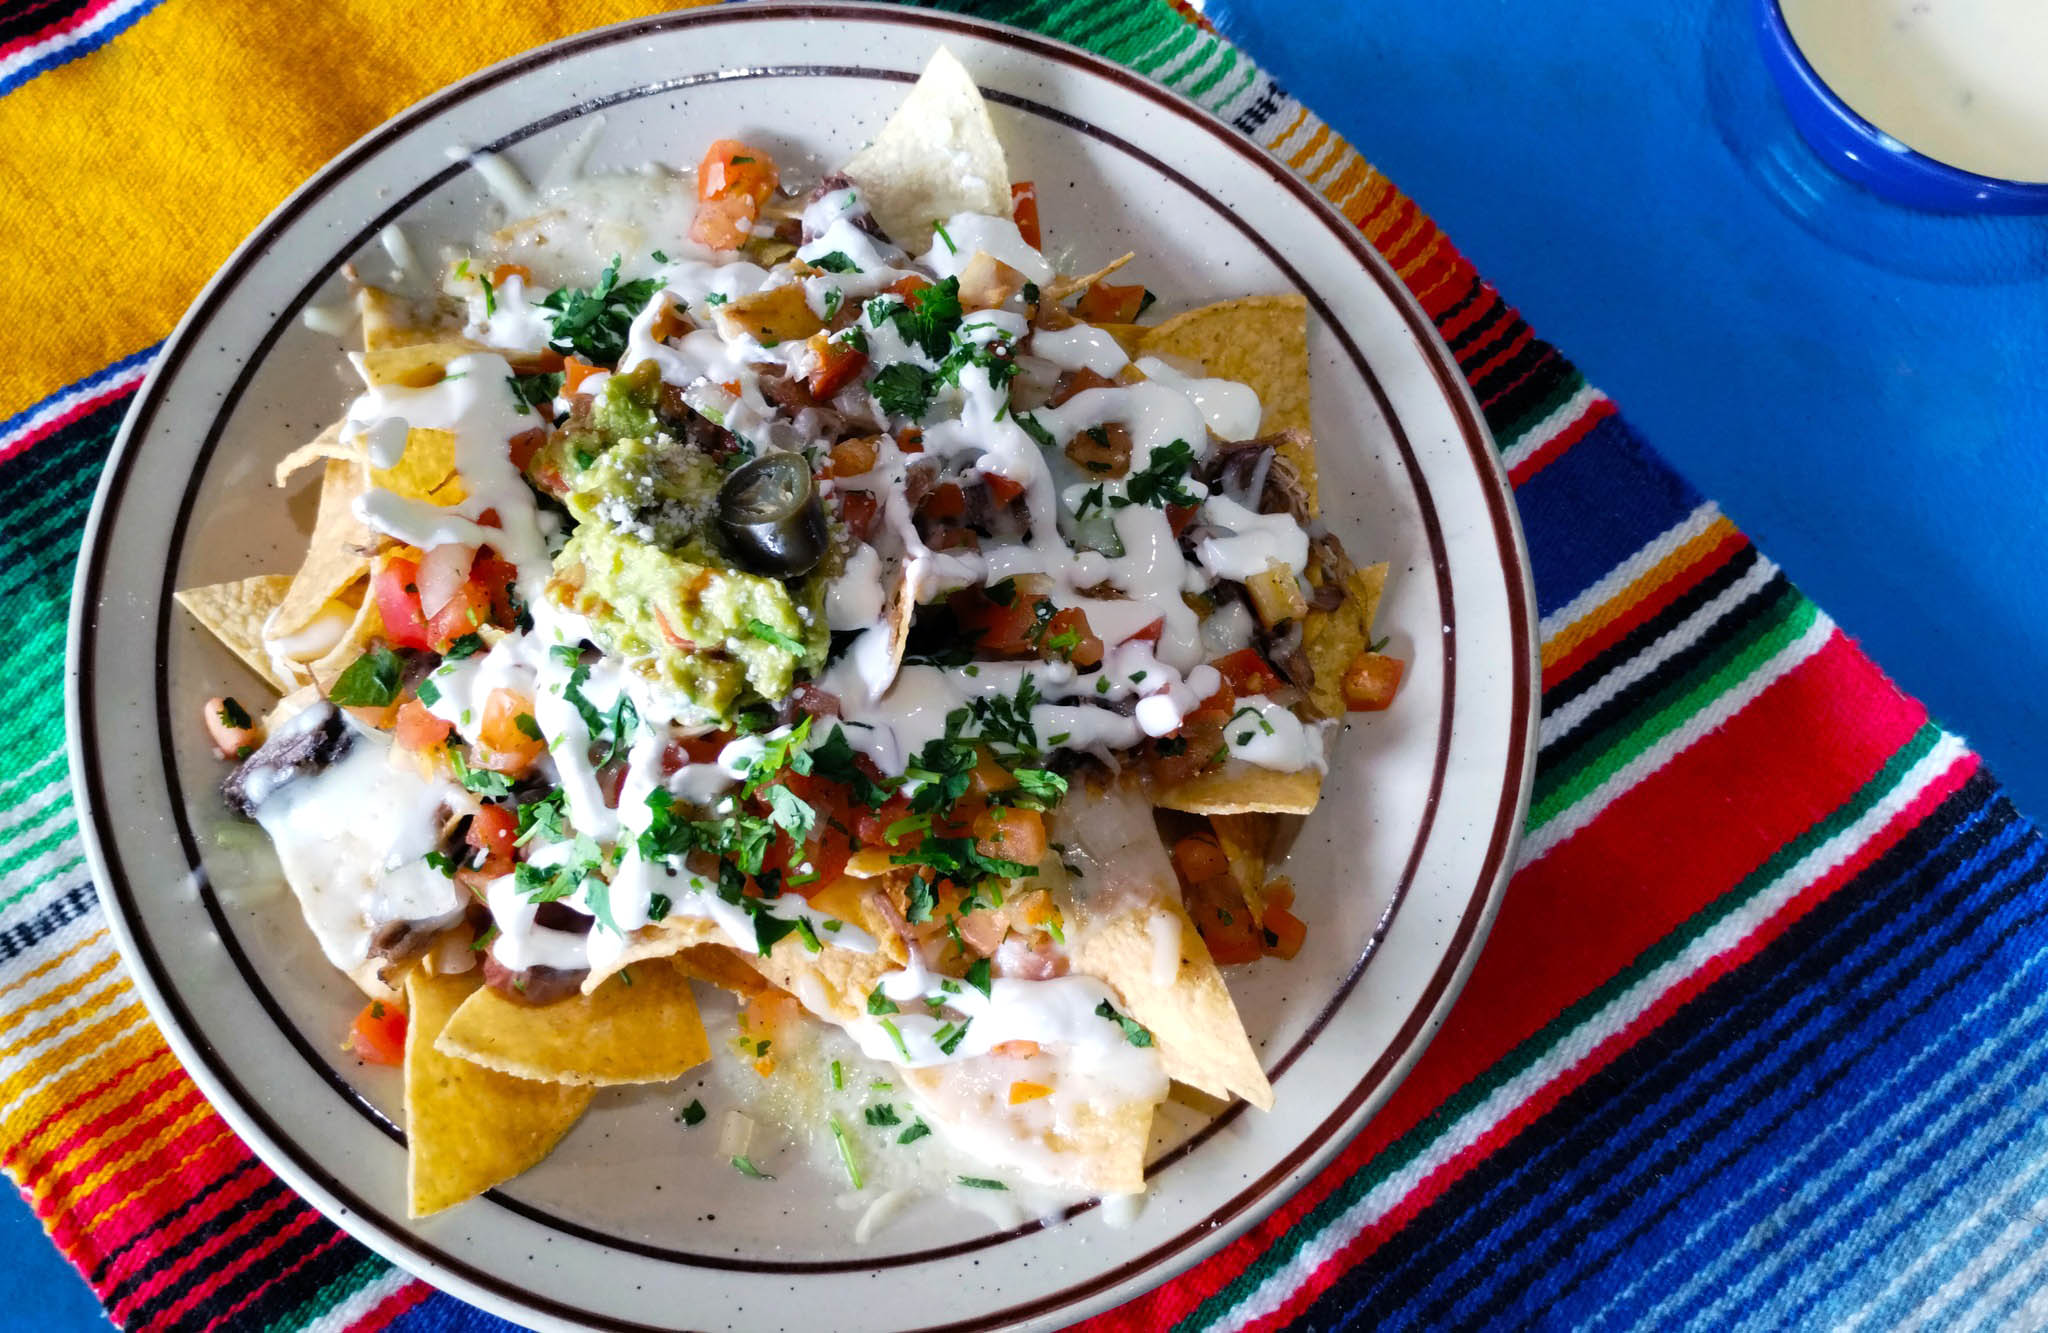 Nachos at Tortuga Mexican Bar and Grill in Gold Beach, Oregon